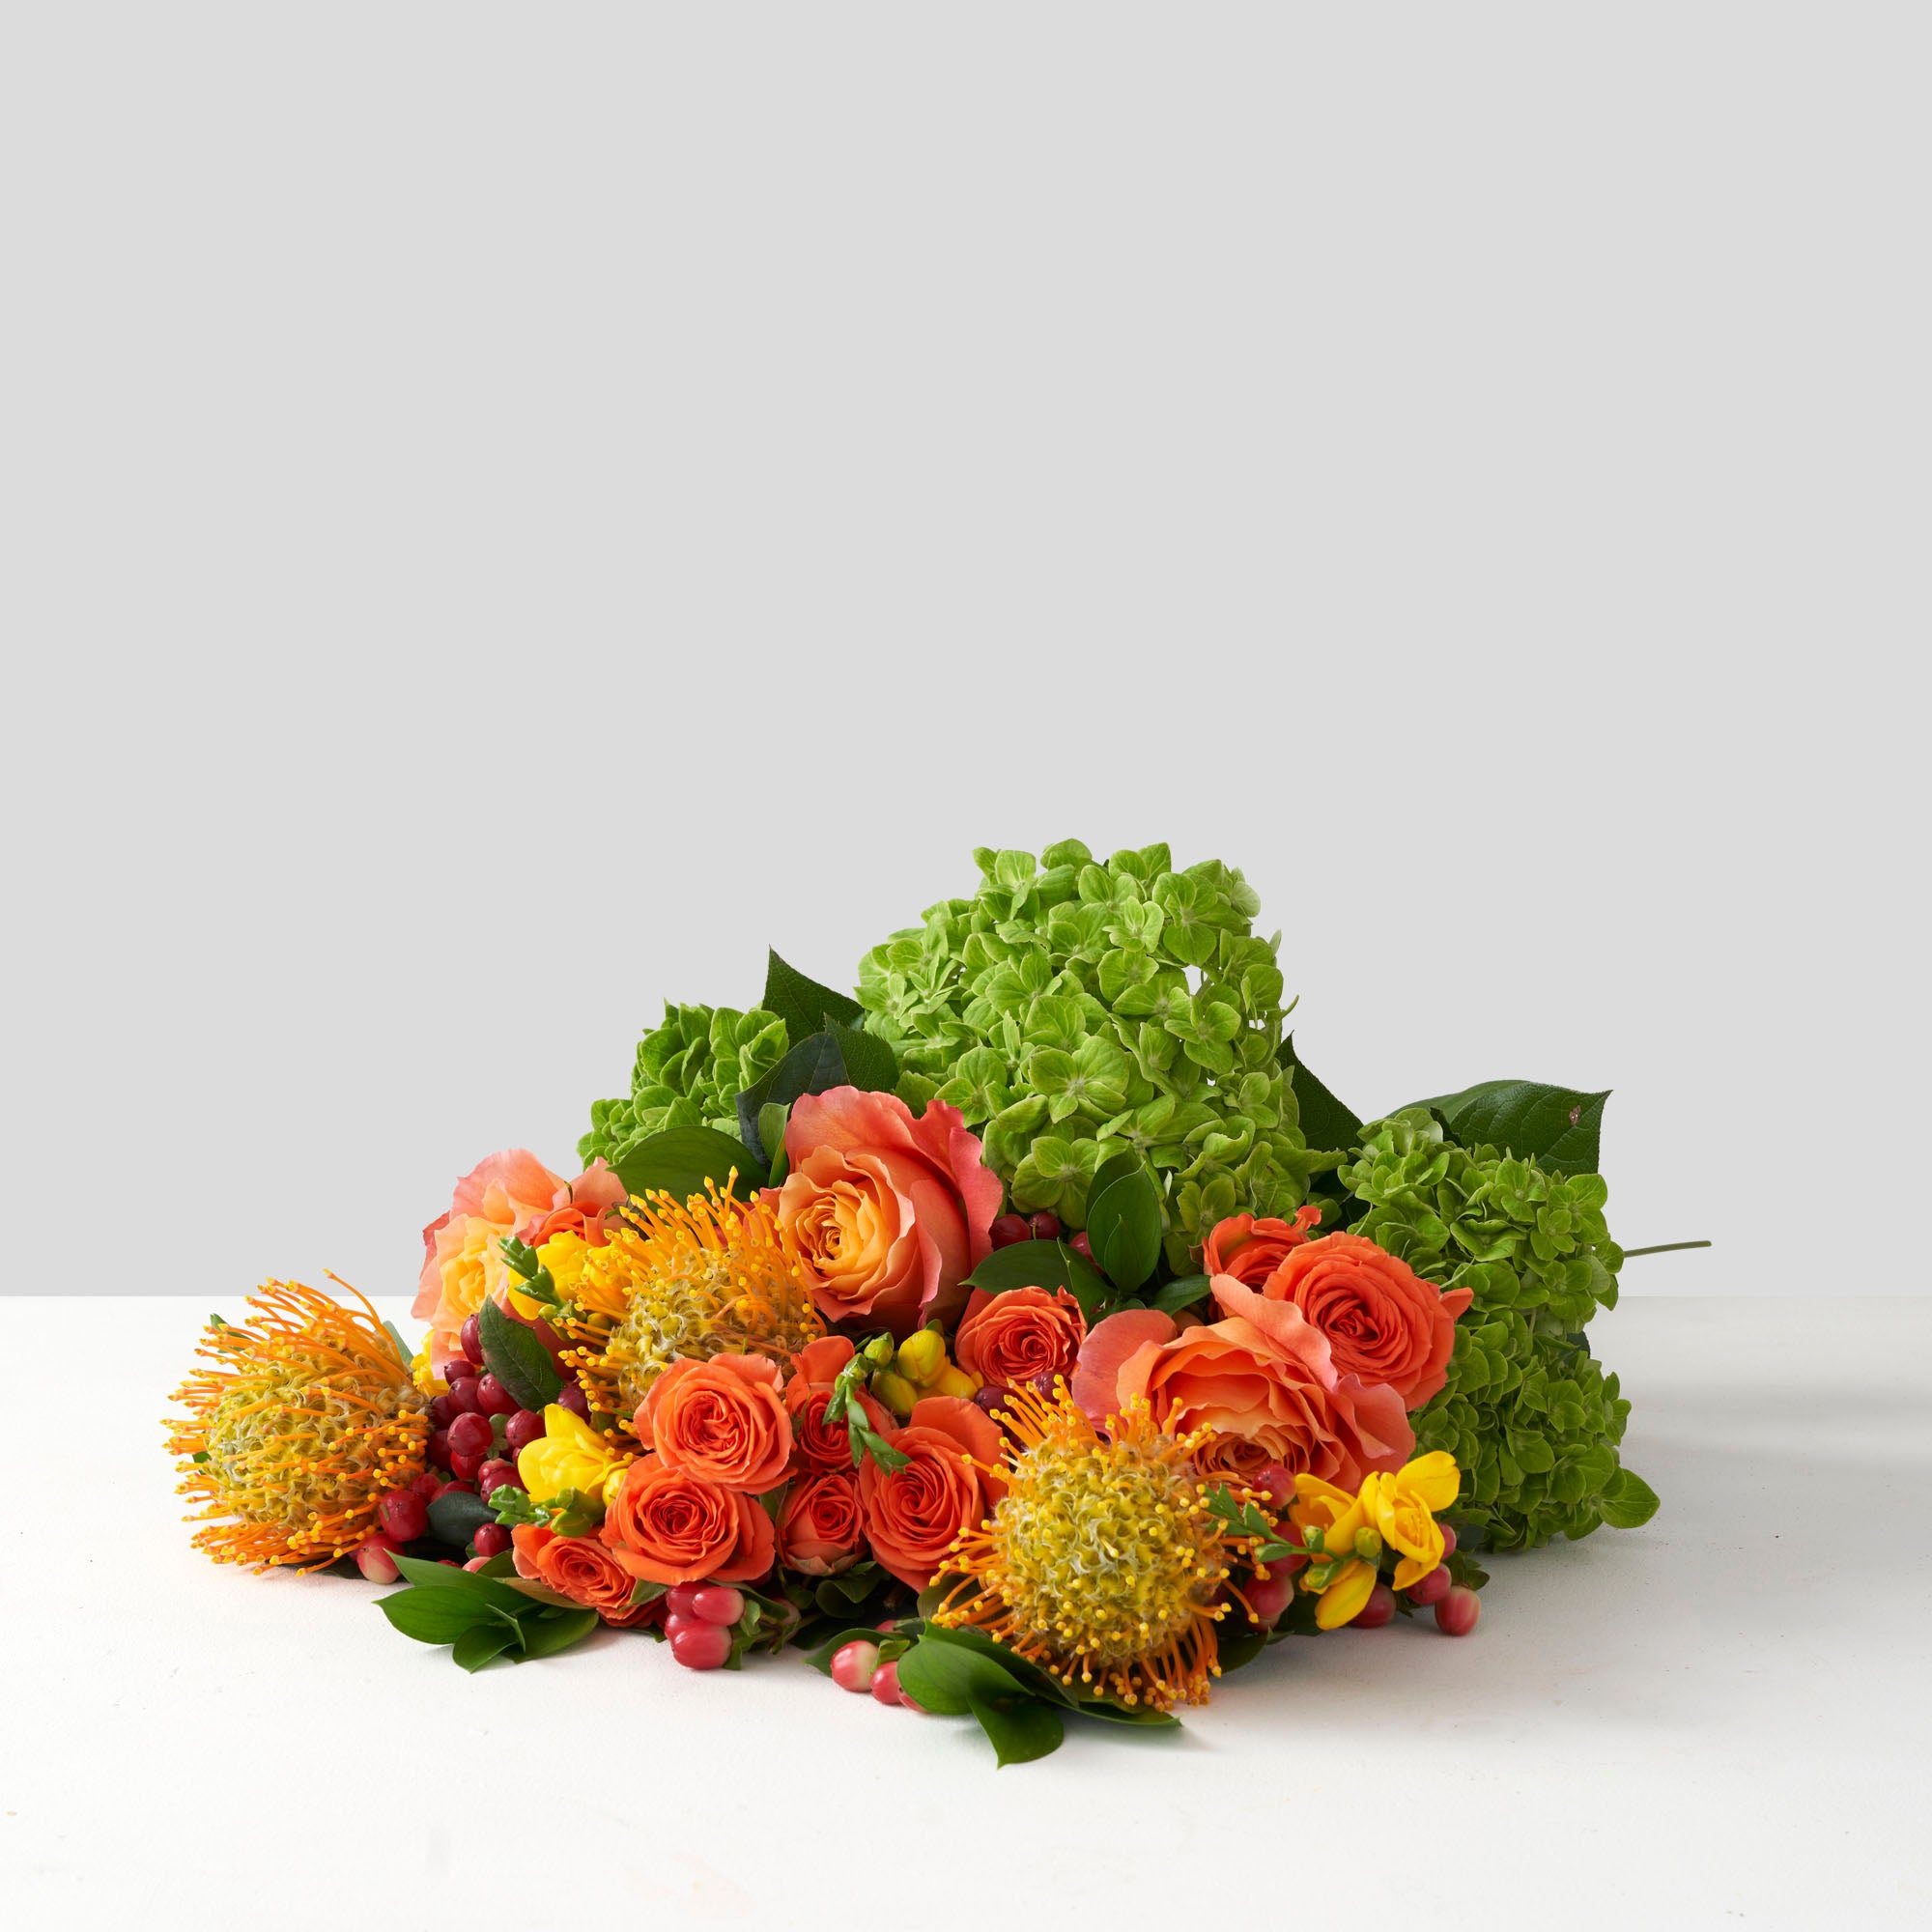 Bouquet of orange, yellow, gold, and green flowers on white background.